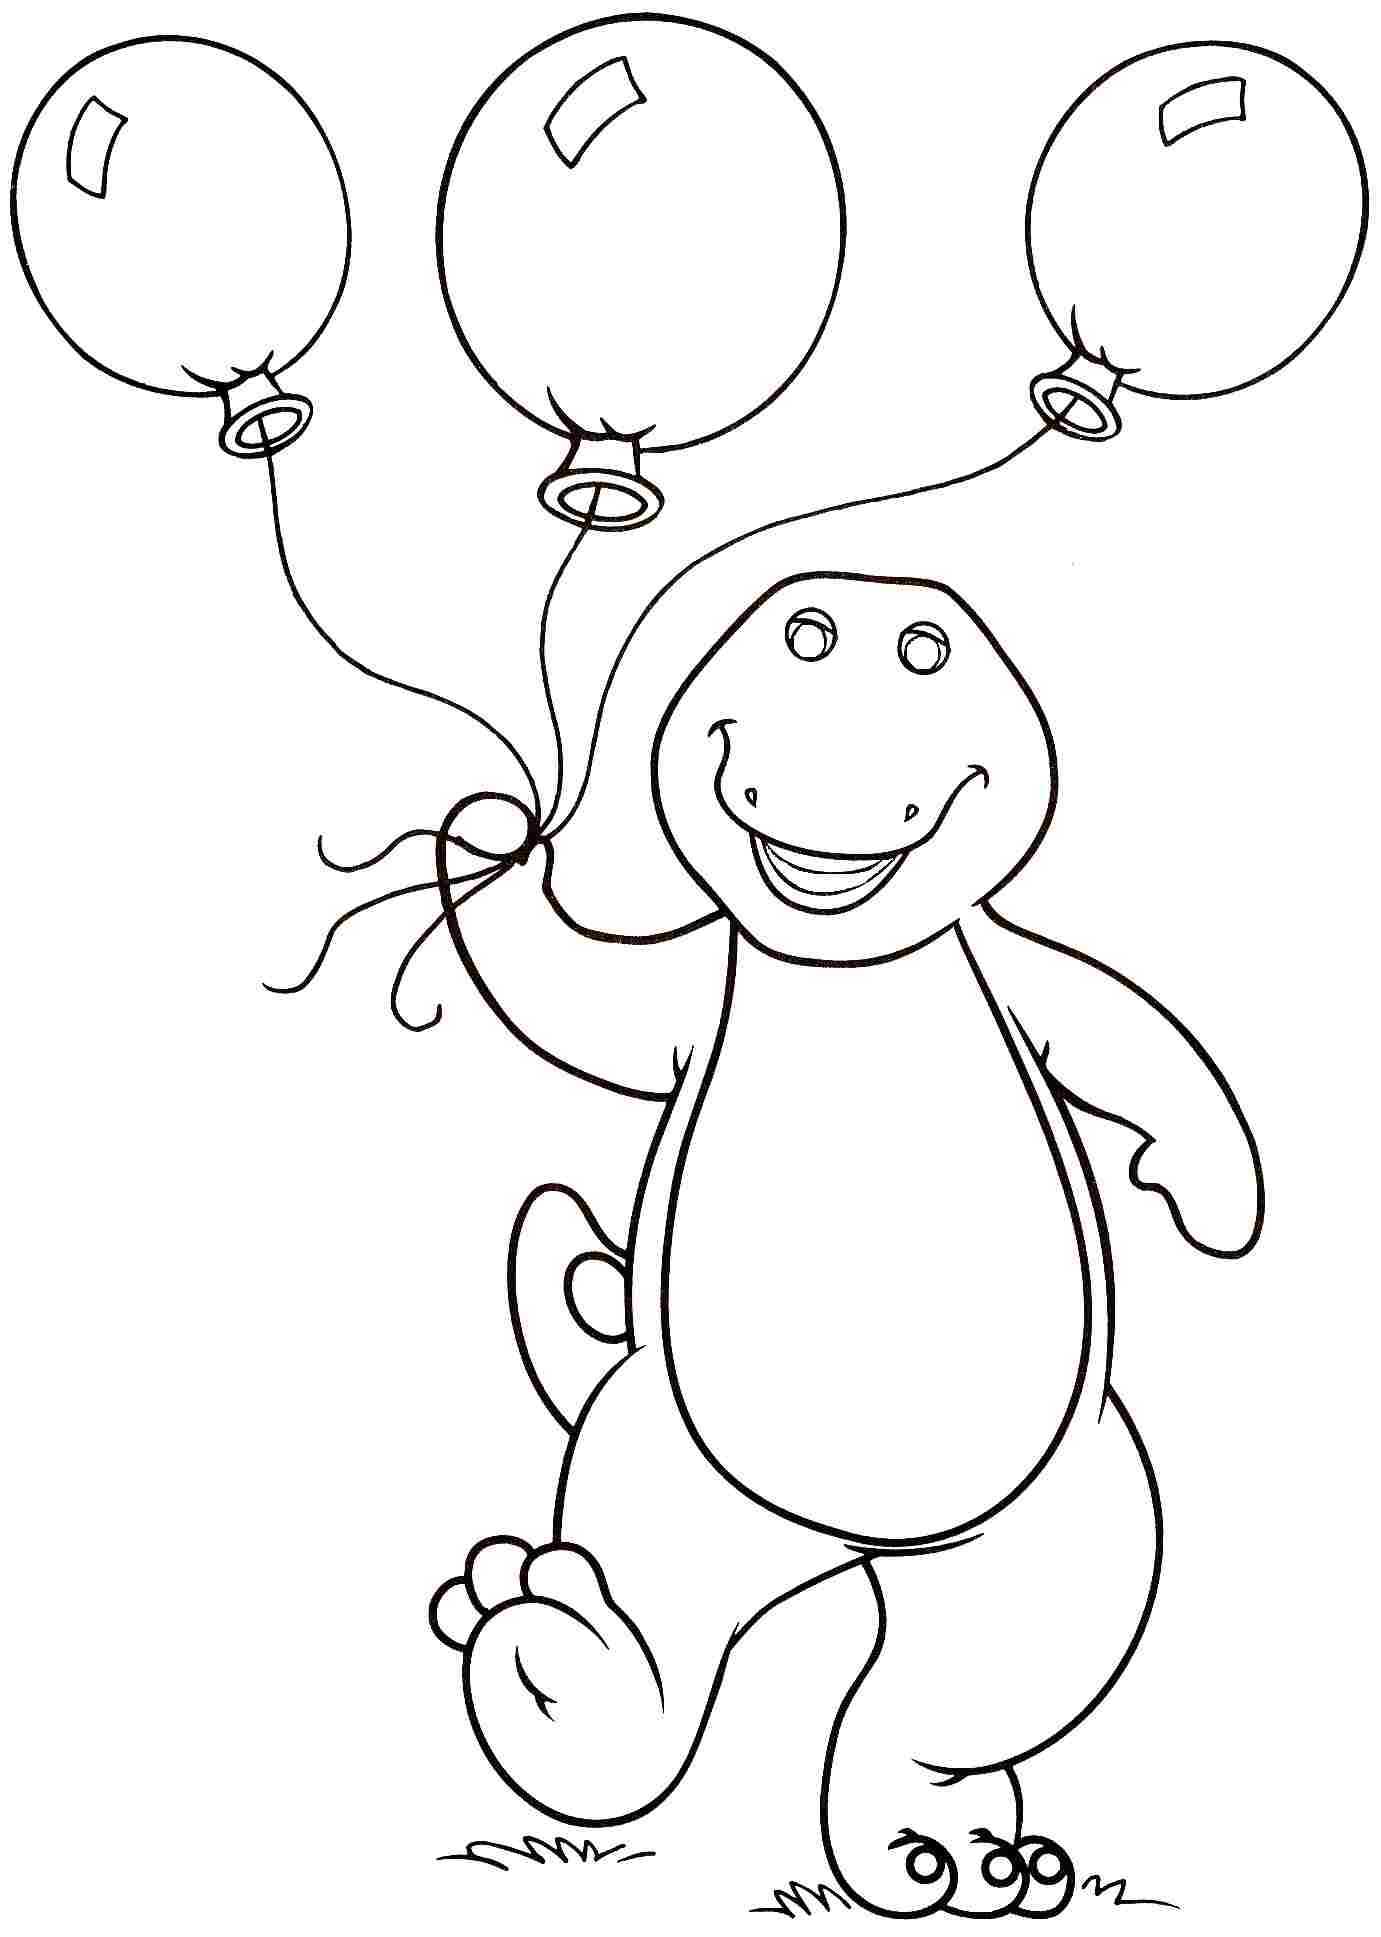 barney coloring balloons drawing birthday holding dinosaur printable friends sheets three happy cartoon printables balloon cute coloringpagesfortoddlers children animal carrying